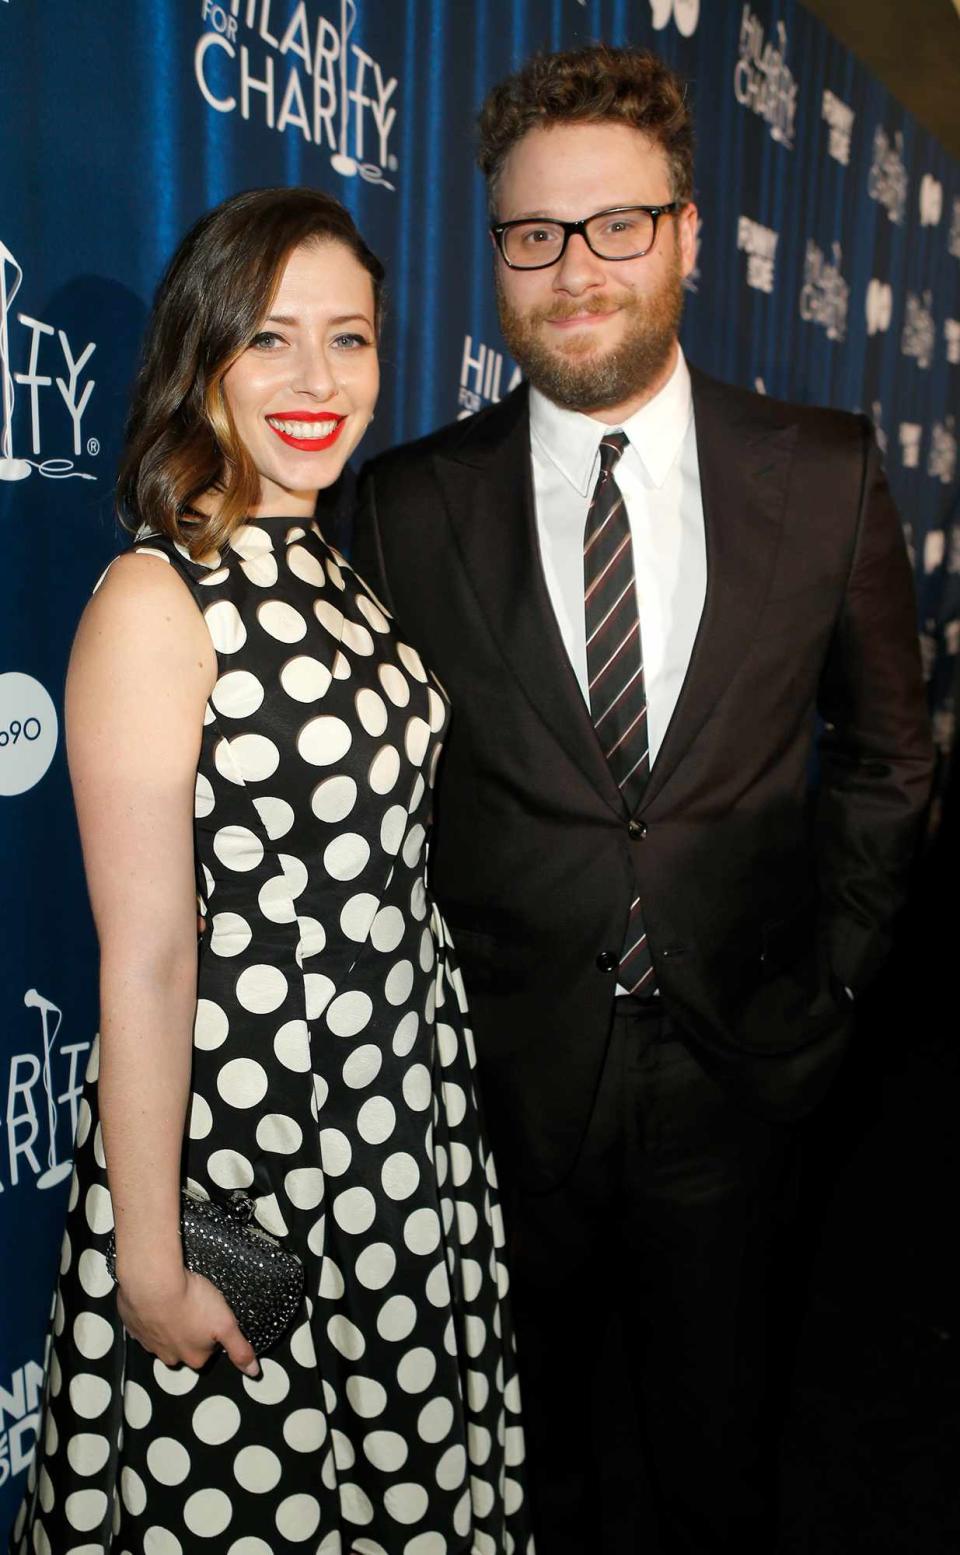 Hilarity for Charity co-founder Lauren Miller Rogen (L) and Hilarity for Charity co-founder/event host Seth Rogen attend attend Hilarity for Charity's Annual Variety Show: James Franco's Bar Mitzvah benefitting the Alzheimer's Association presented by Funny Or Die and go90 at the Hollywood Palladium on October 17, 2015 in Los Angeles, California